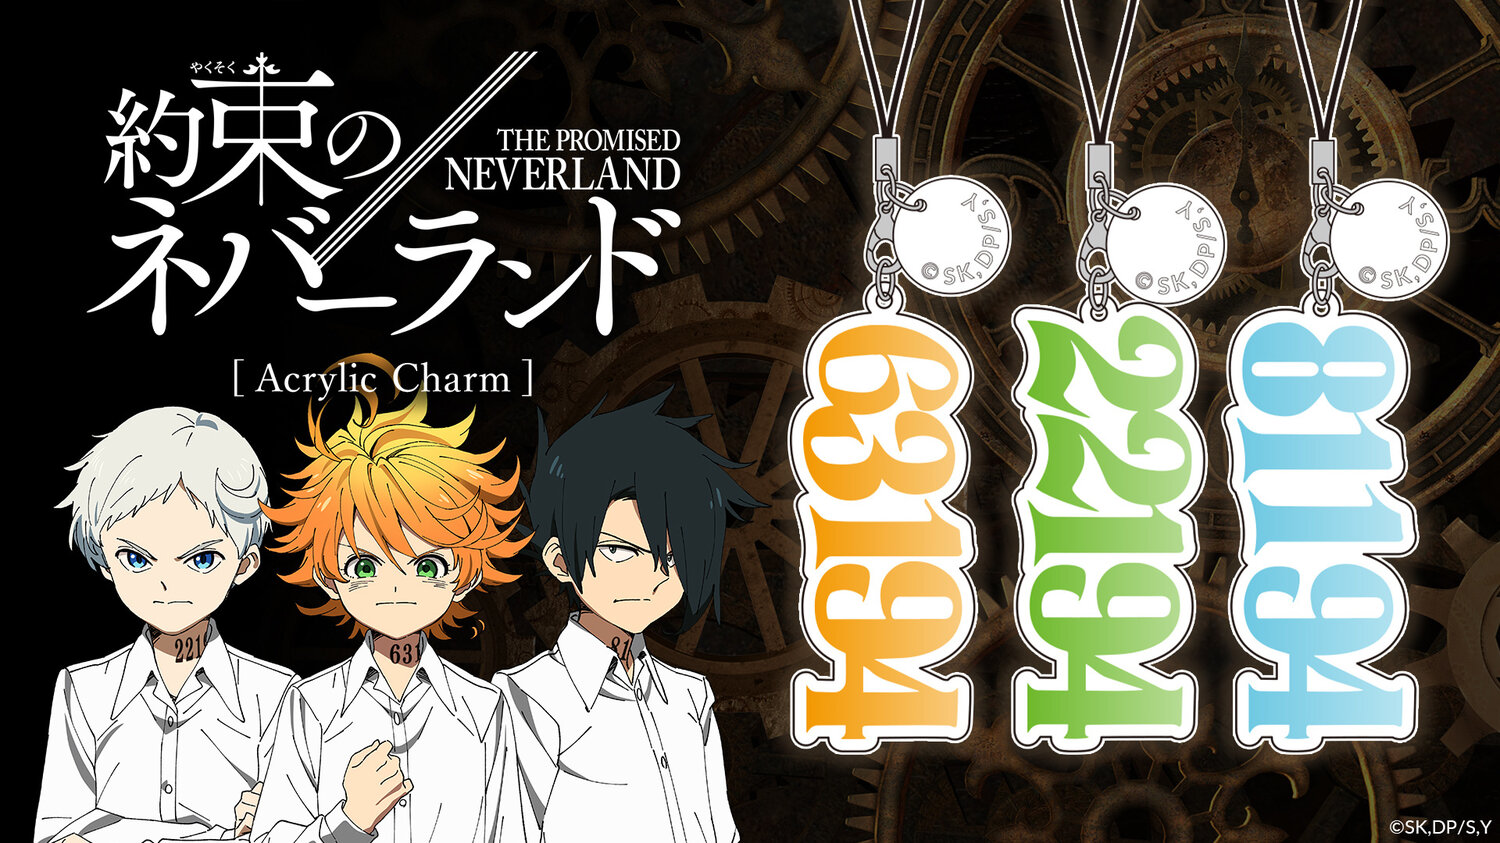 The Id Numbers Of The Three The Promised Neverland Protagonists Are Now 